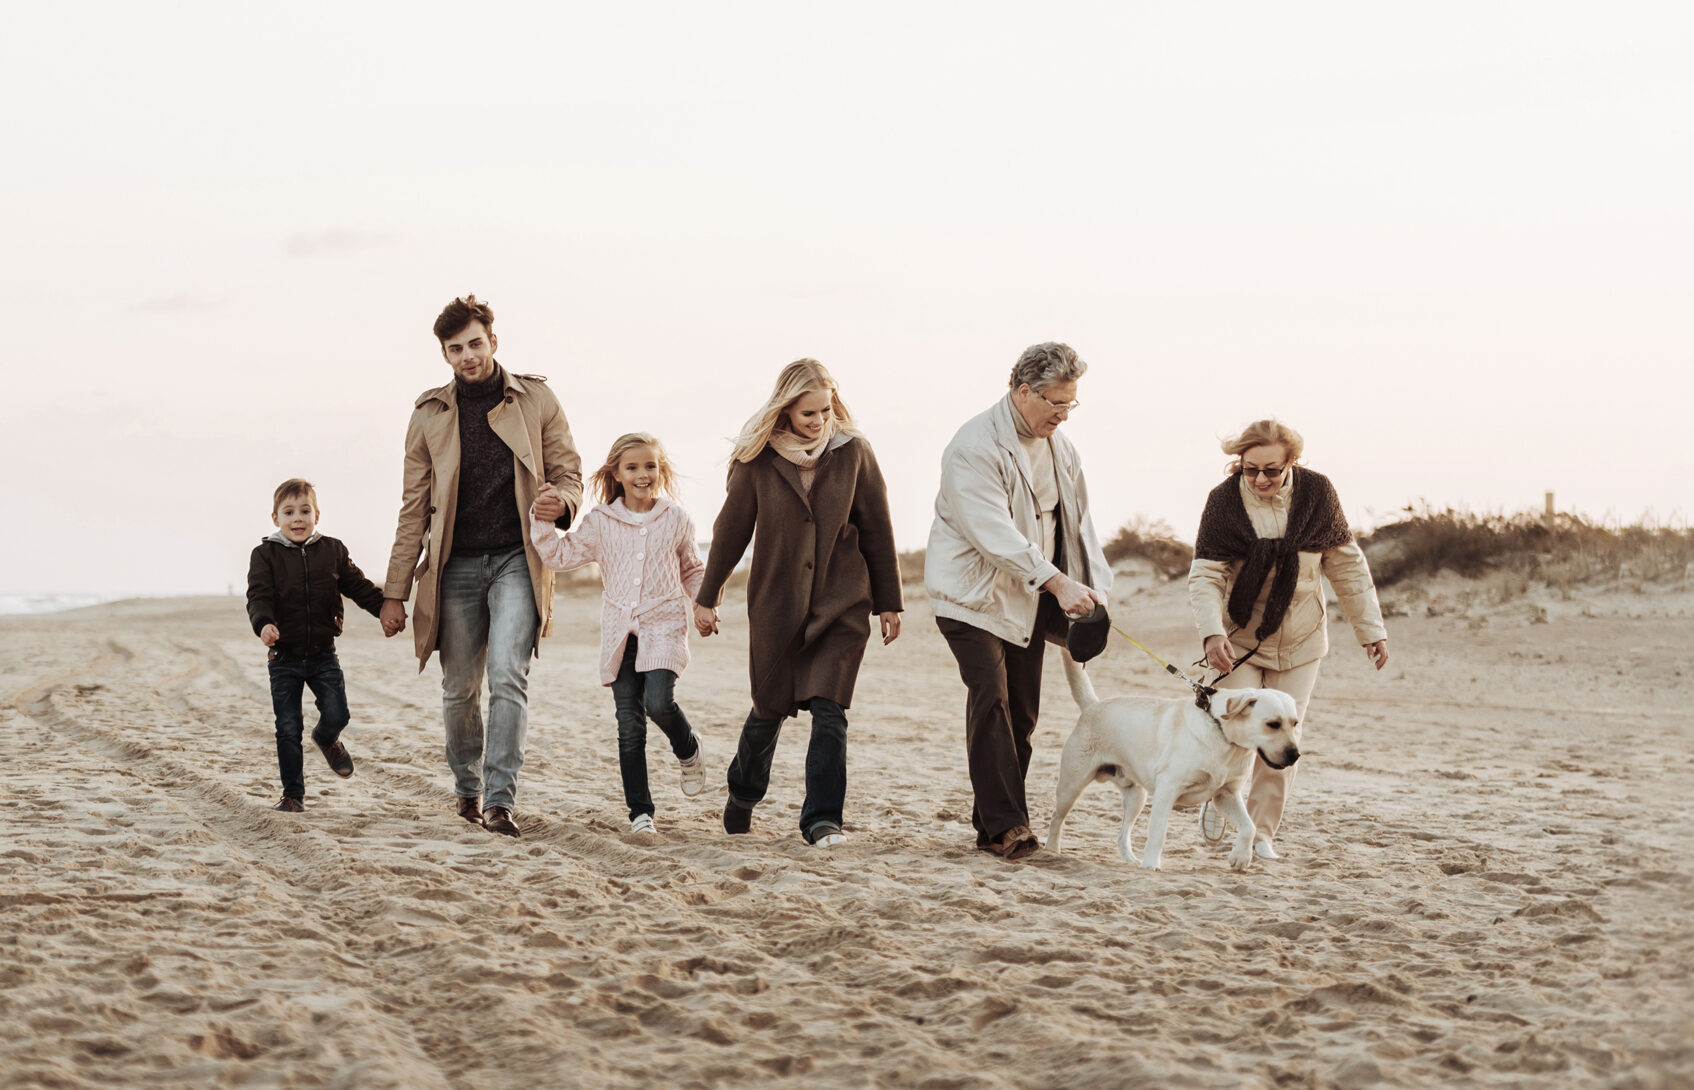 A multigenerational family walking on the beach with their dog